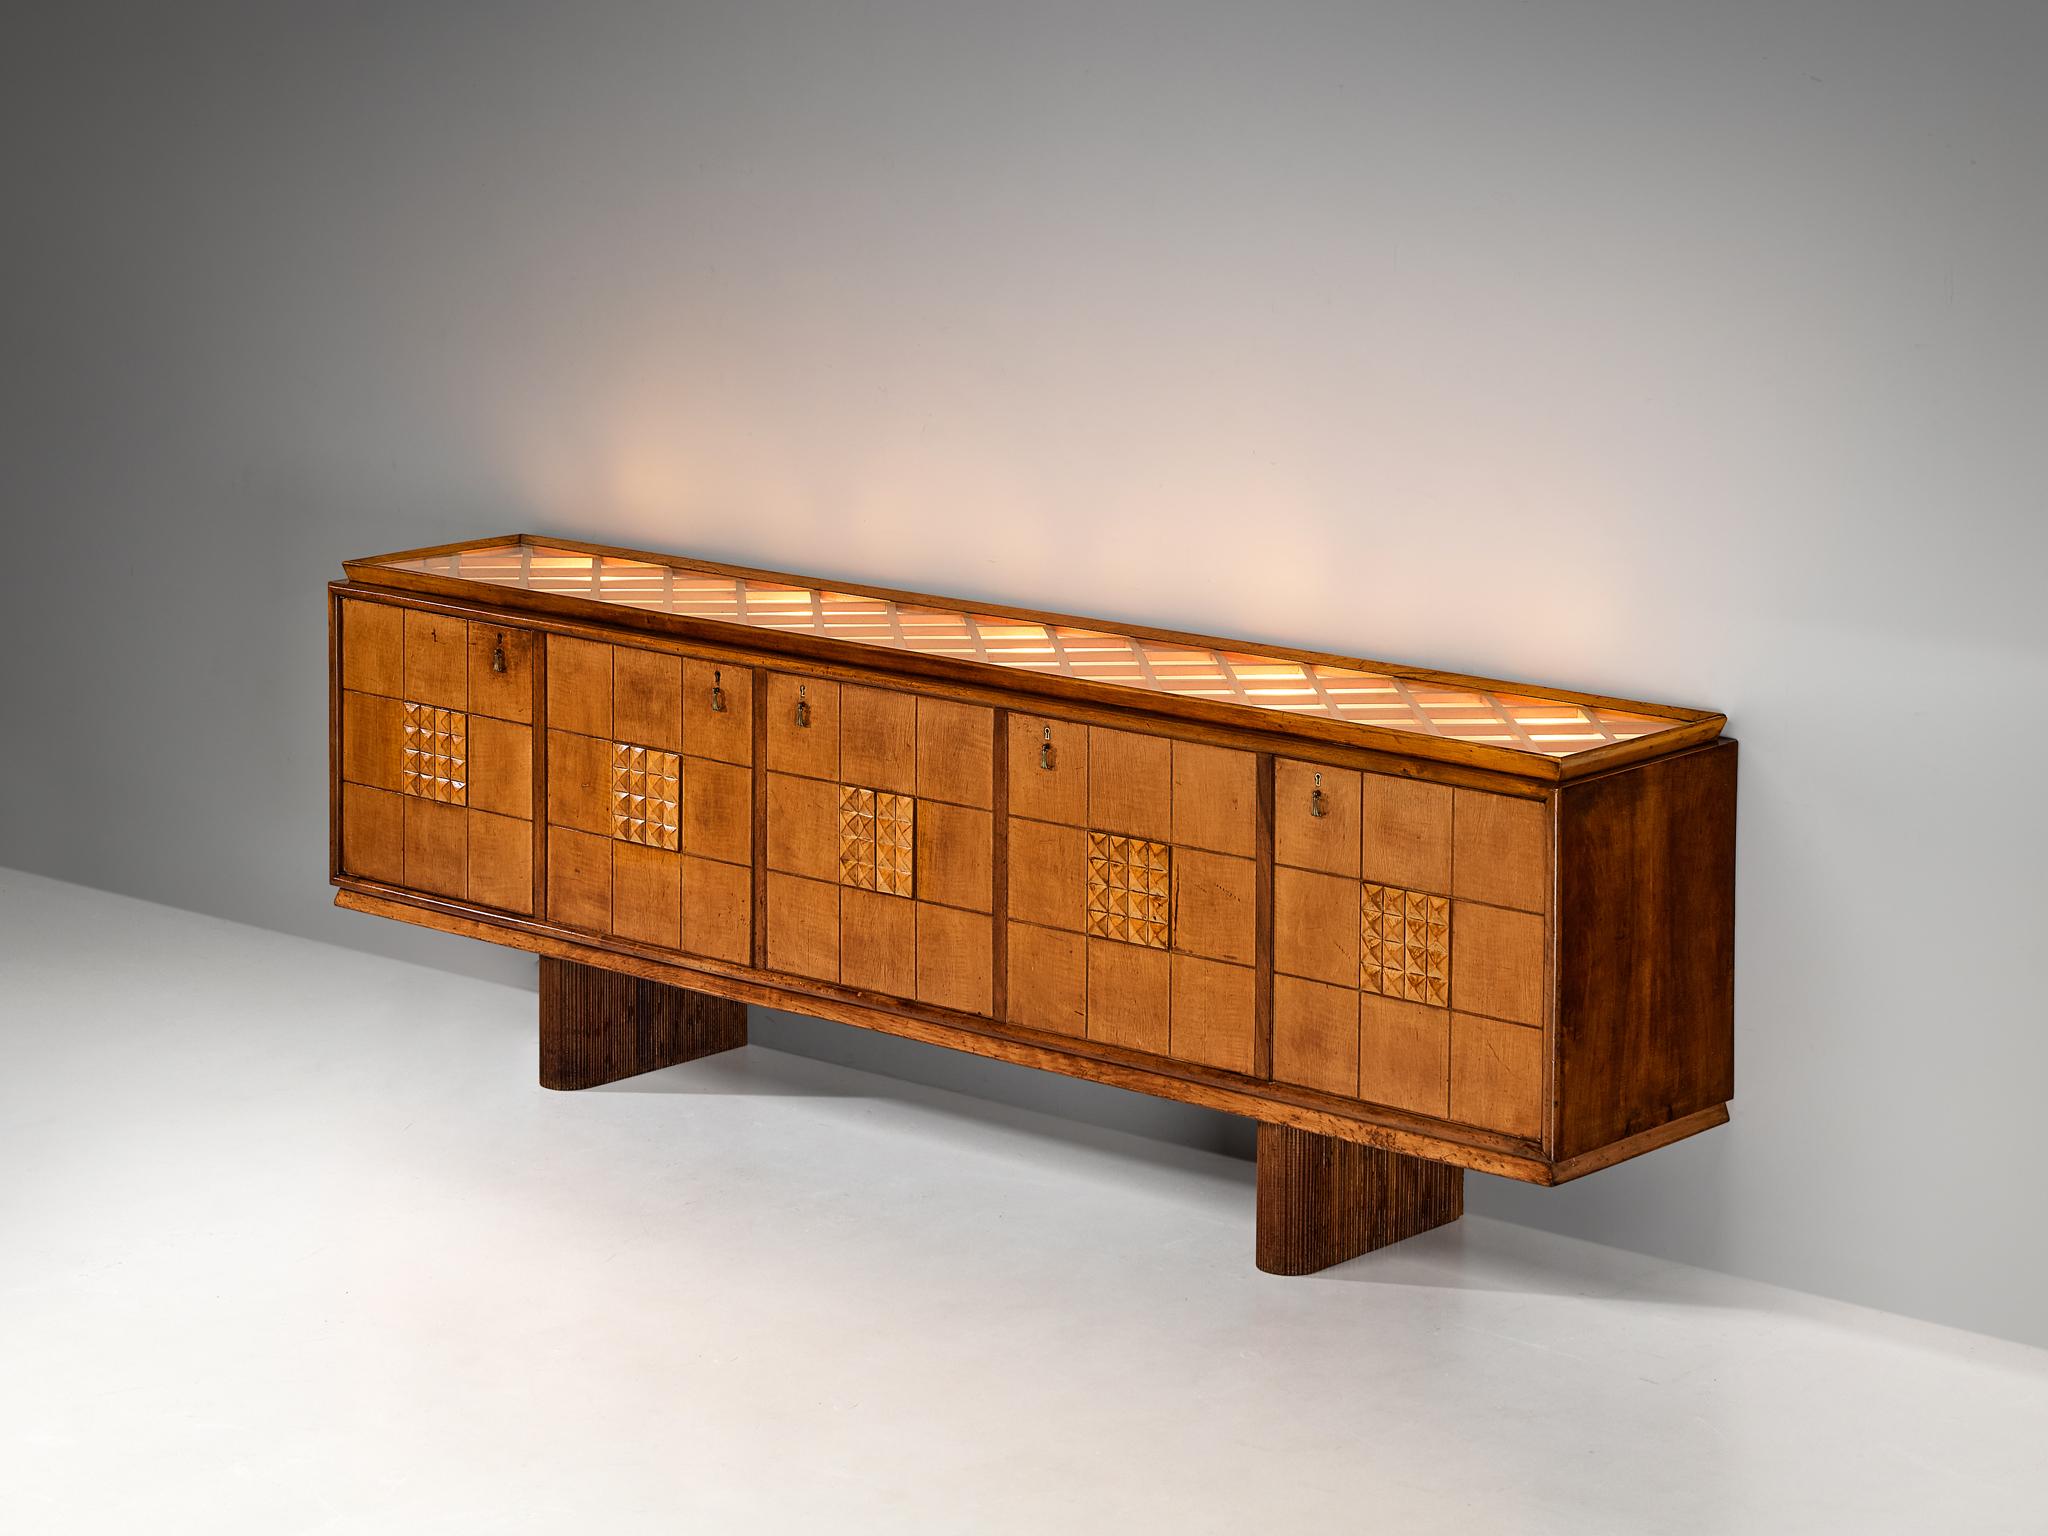 Sideboard, walnut, maple, glass, Italy, 1940s

This truly remarkable credenza is from Italy, showcasing its excellence in composition, material use, and intricate detailing. The front is adorned with square panels, with small carved tetrahedrons at